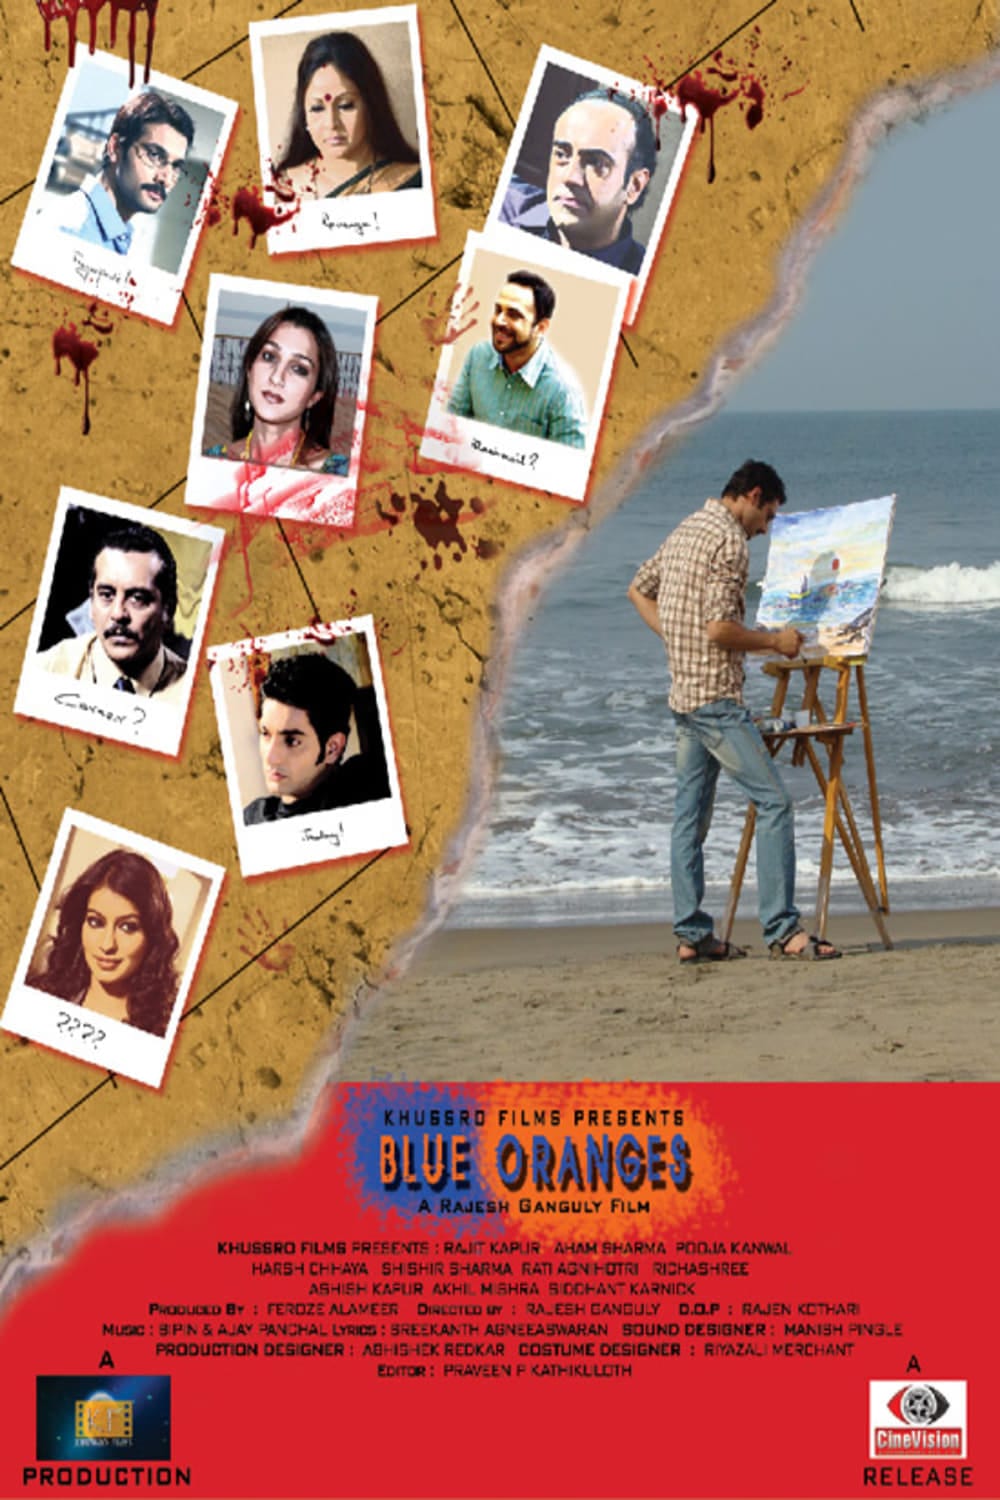 Poster for the movie "Blue Oranges"